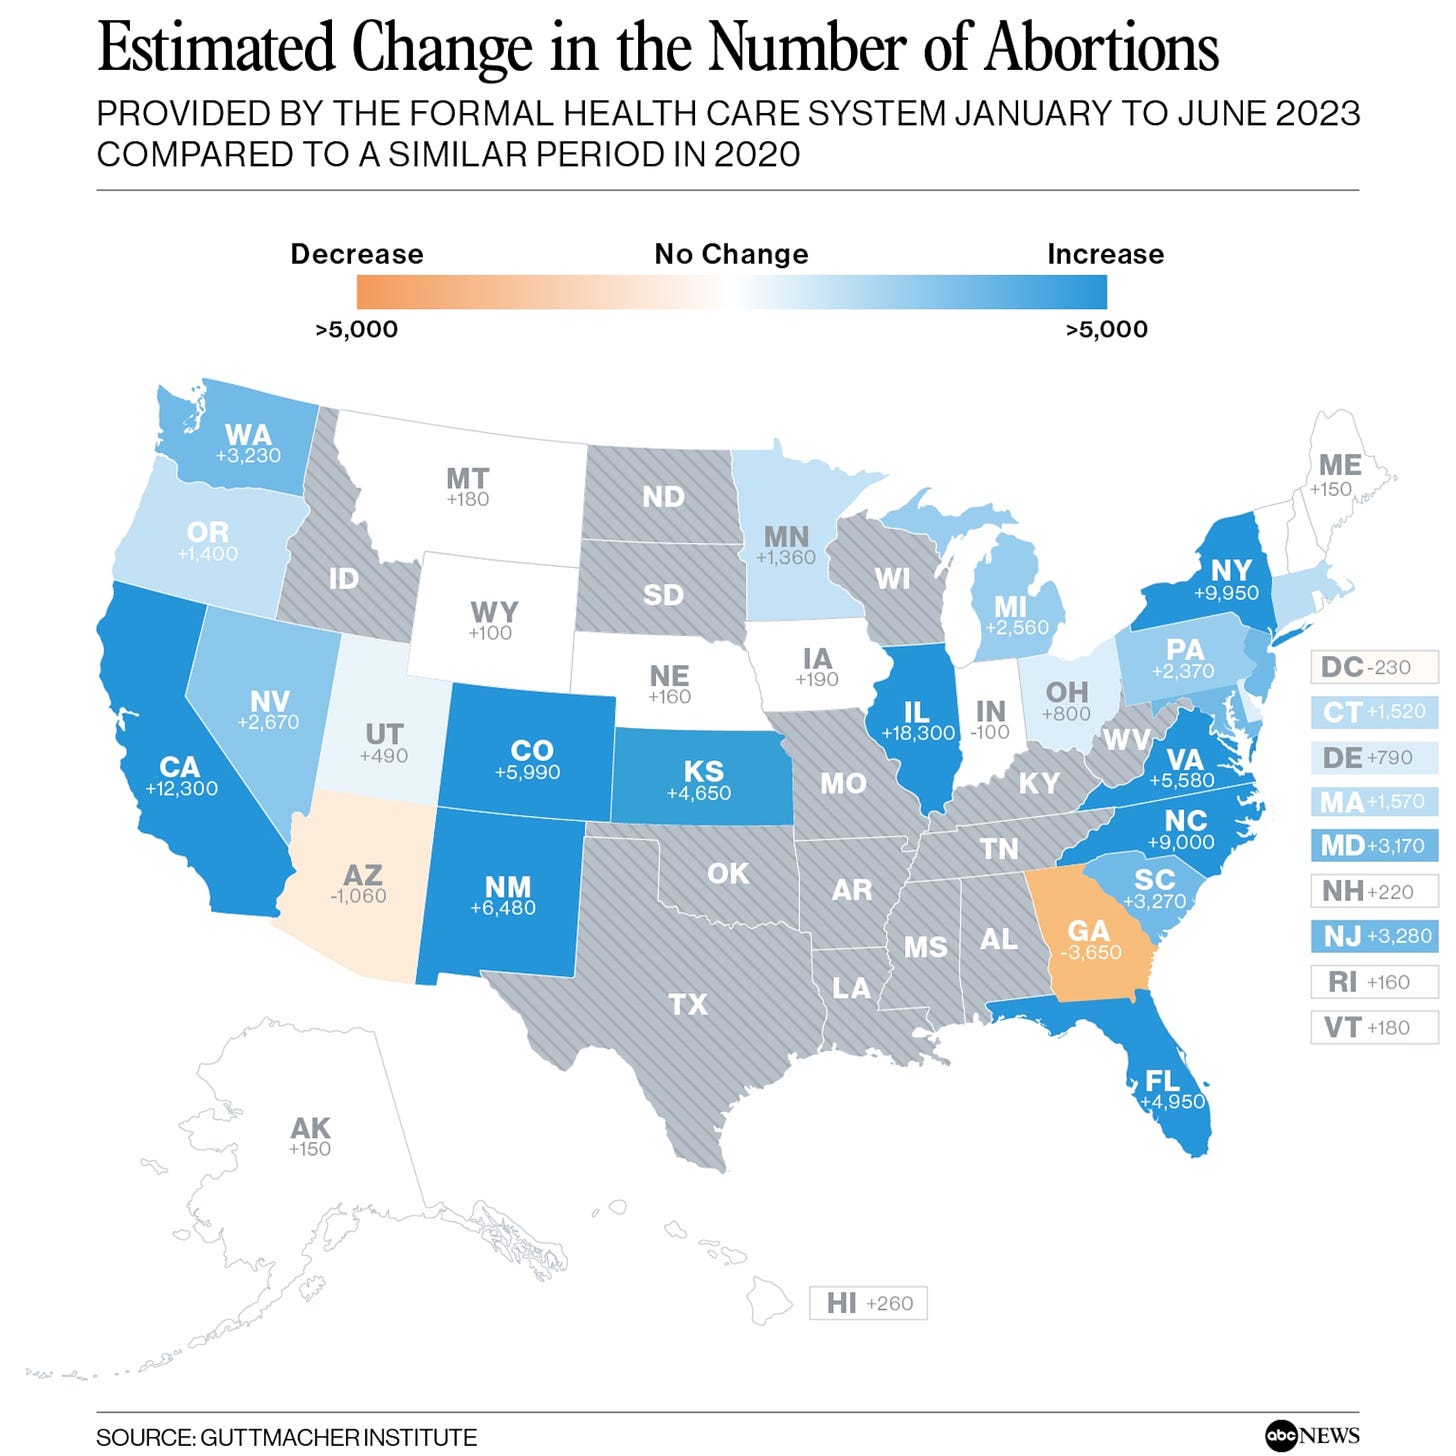 Estimated Change in the Number of Abortions